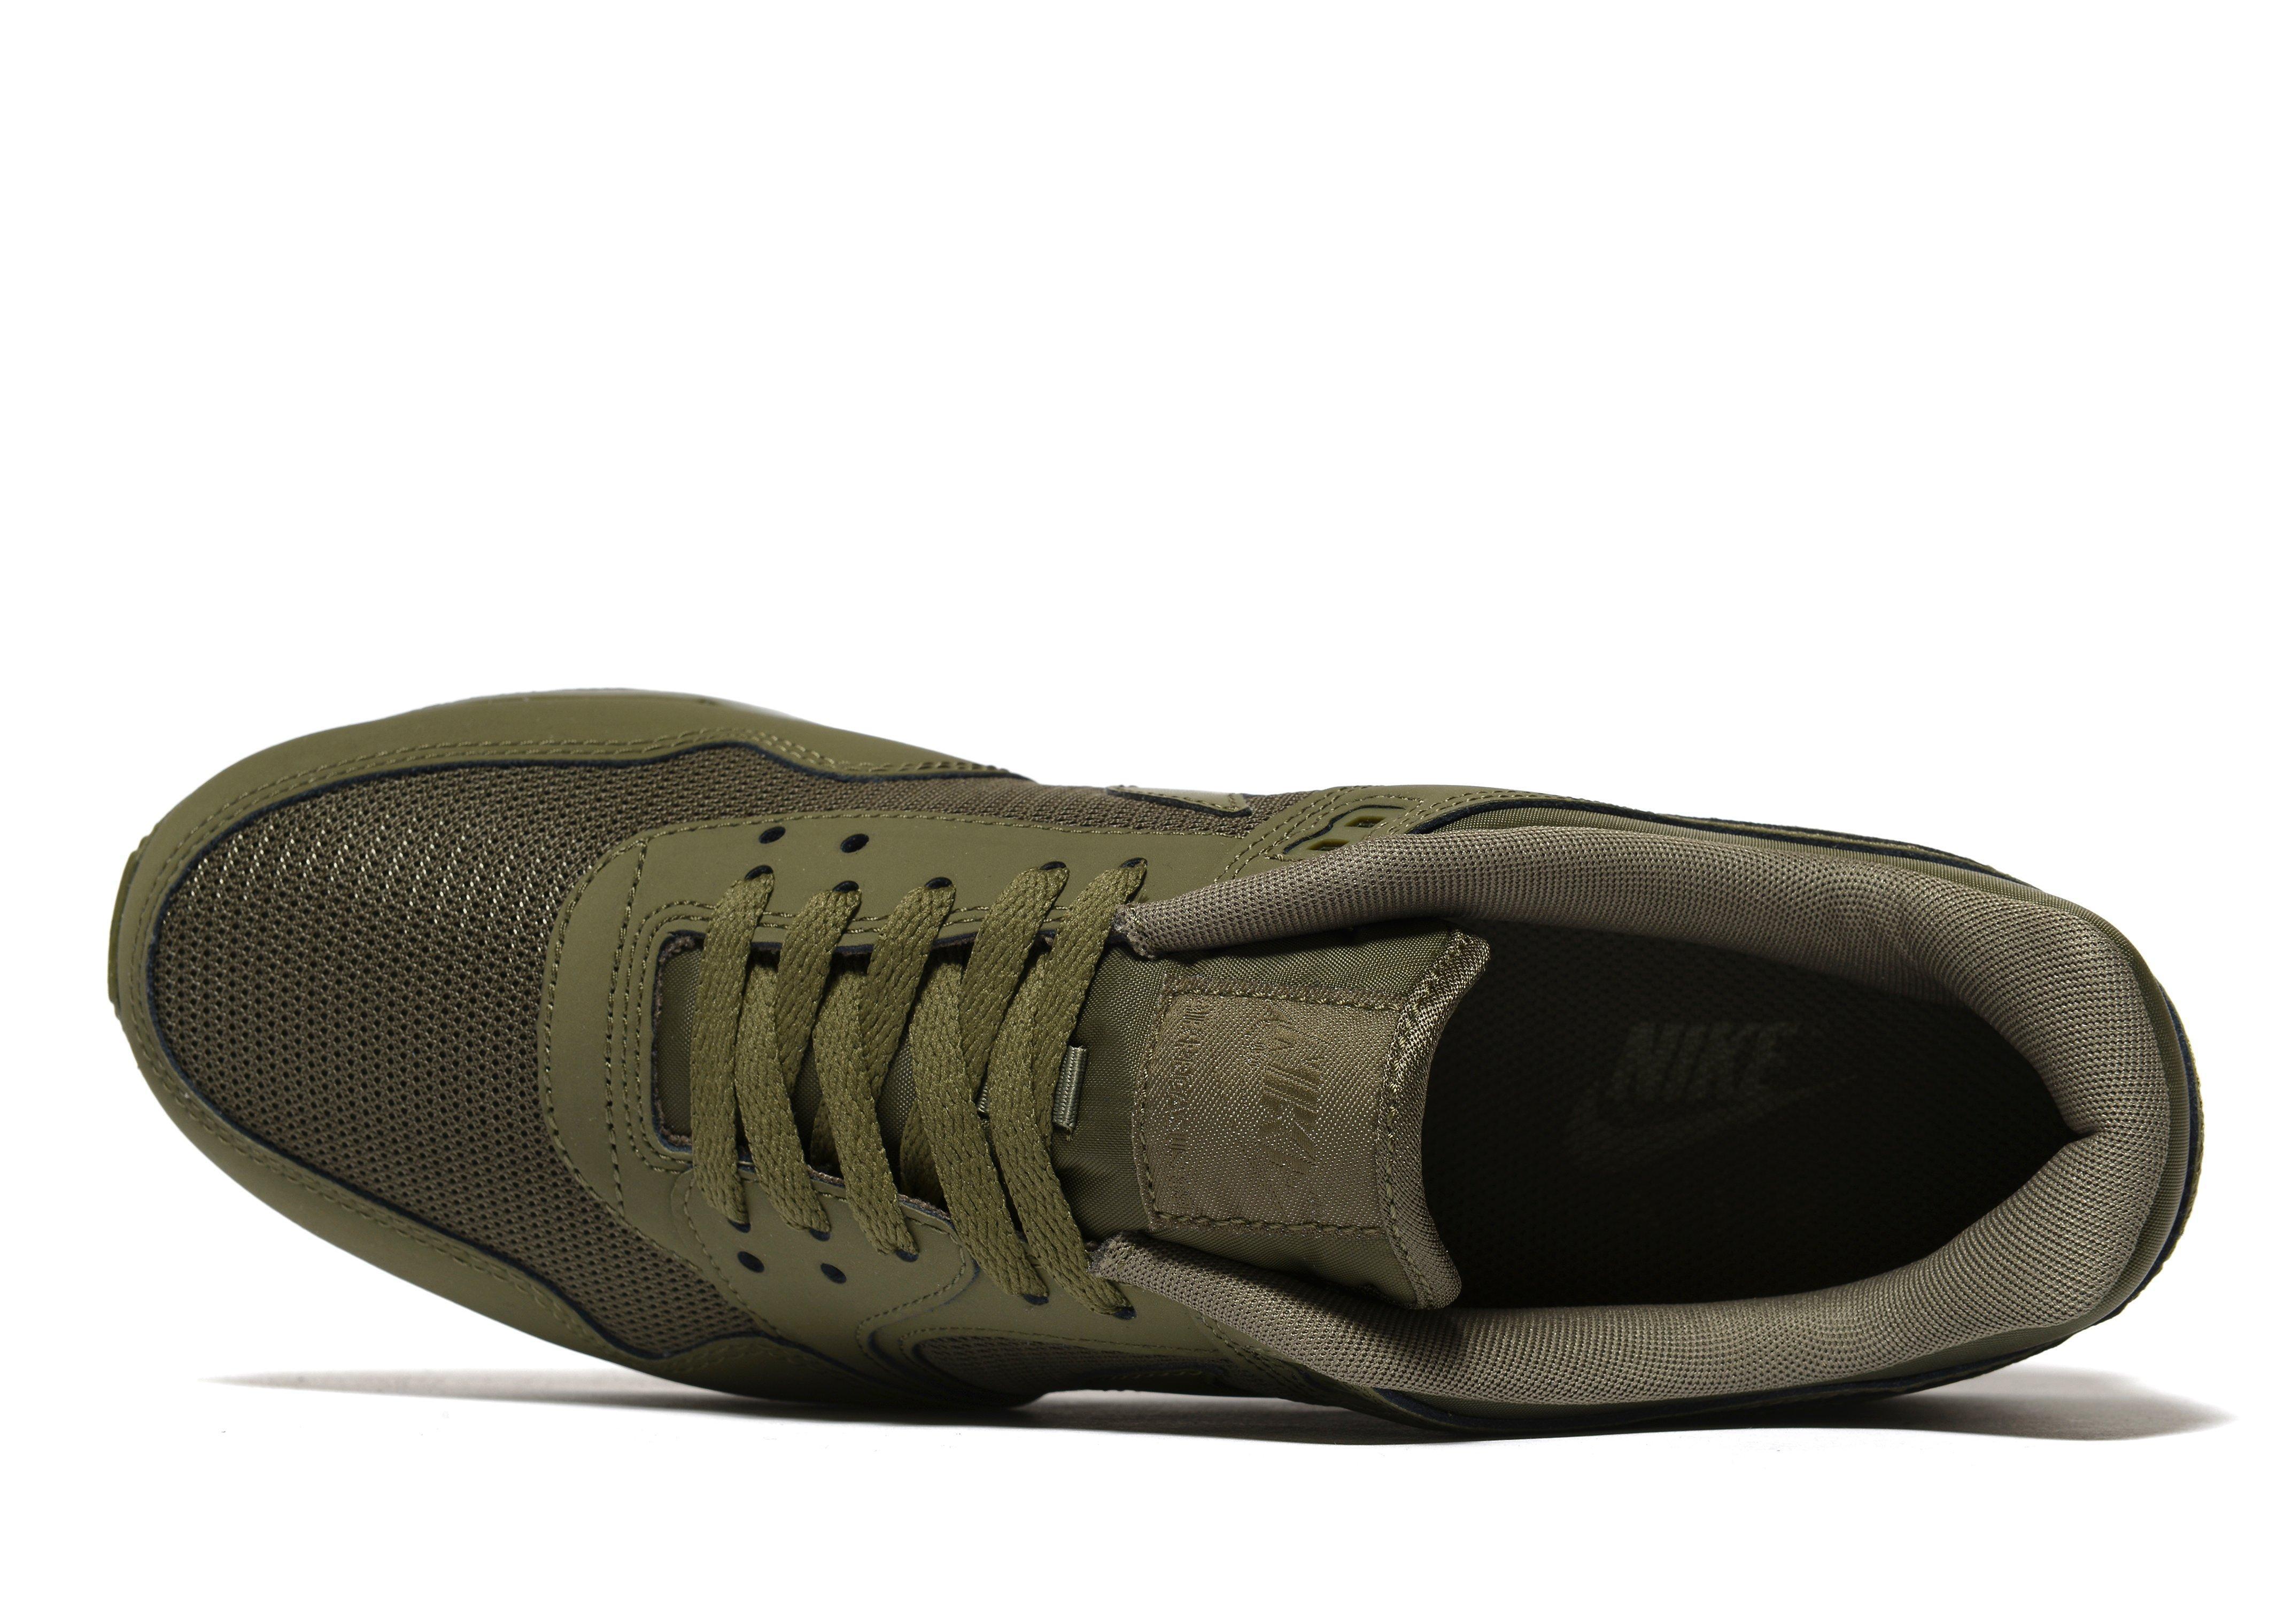 Nike Leather Pegasus 89 in Olive (Green 